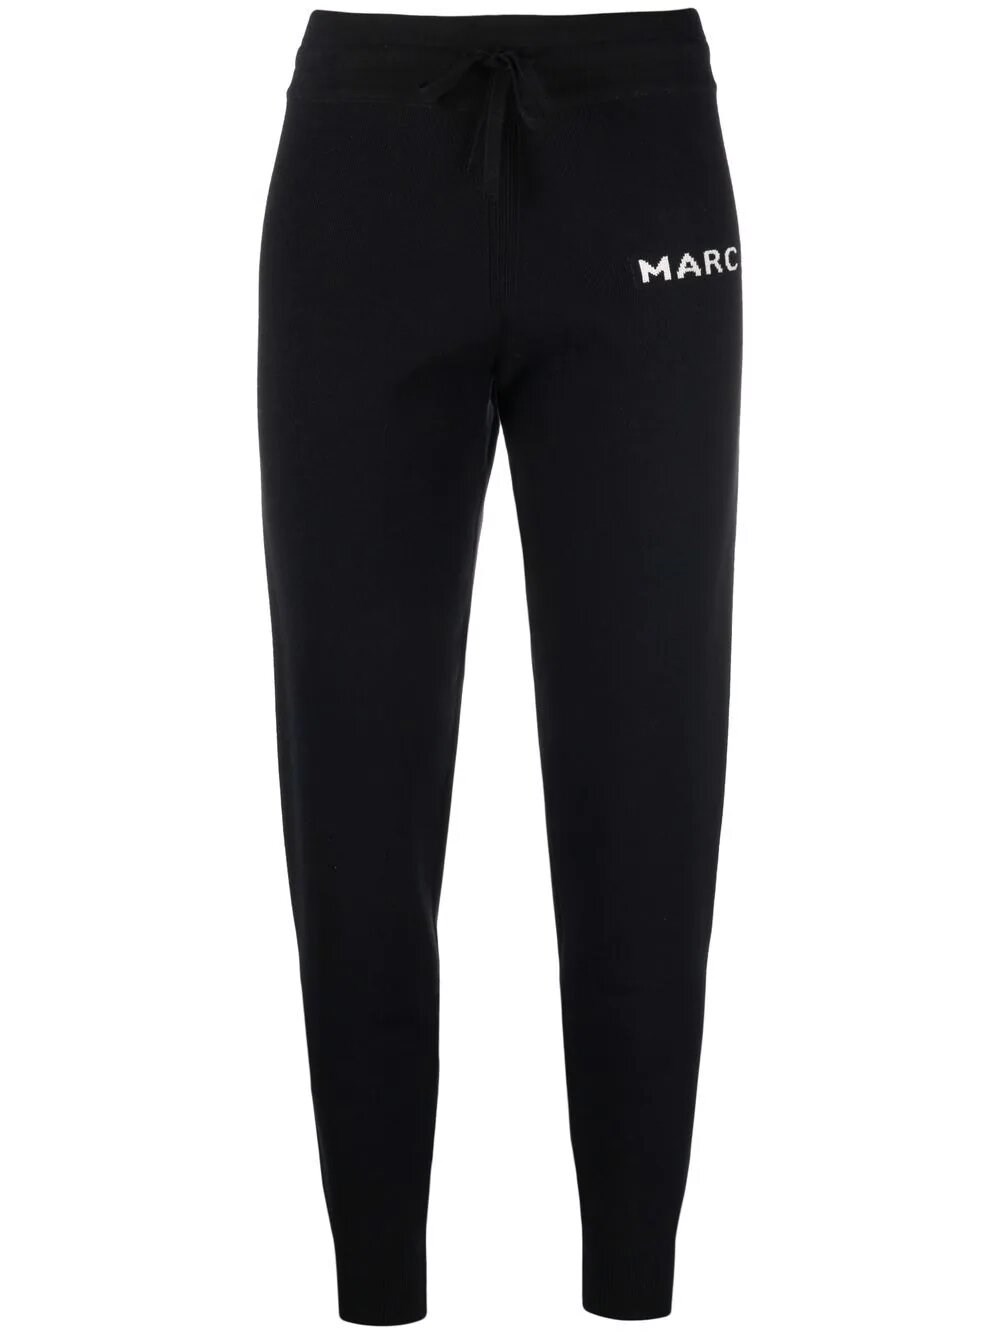 MARC JACOBS THE KNIT PANT